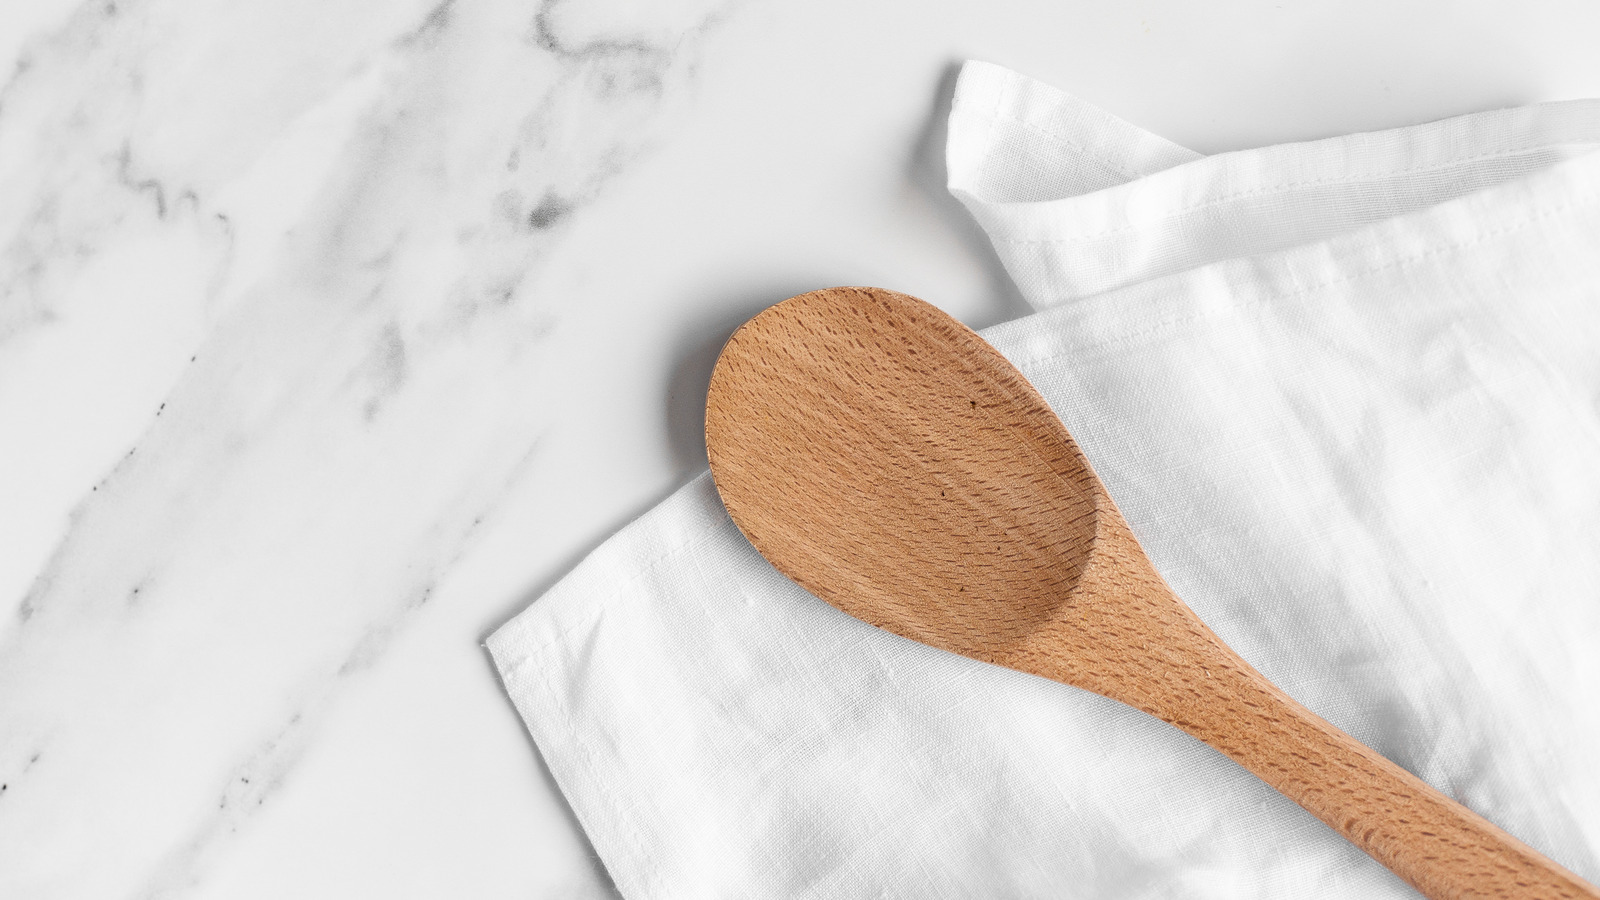 https://www.tastingtable.com/img/gallery/stop-worrying-about-cooking-with-a-wooden-spoon/l-intro-1651613489.jpg